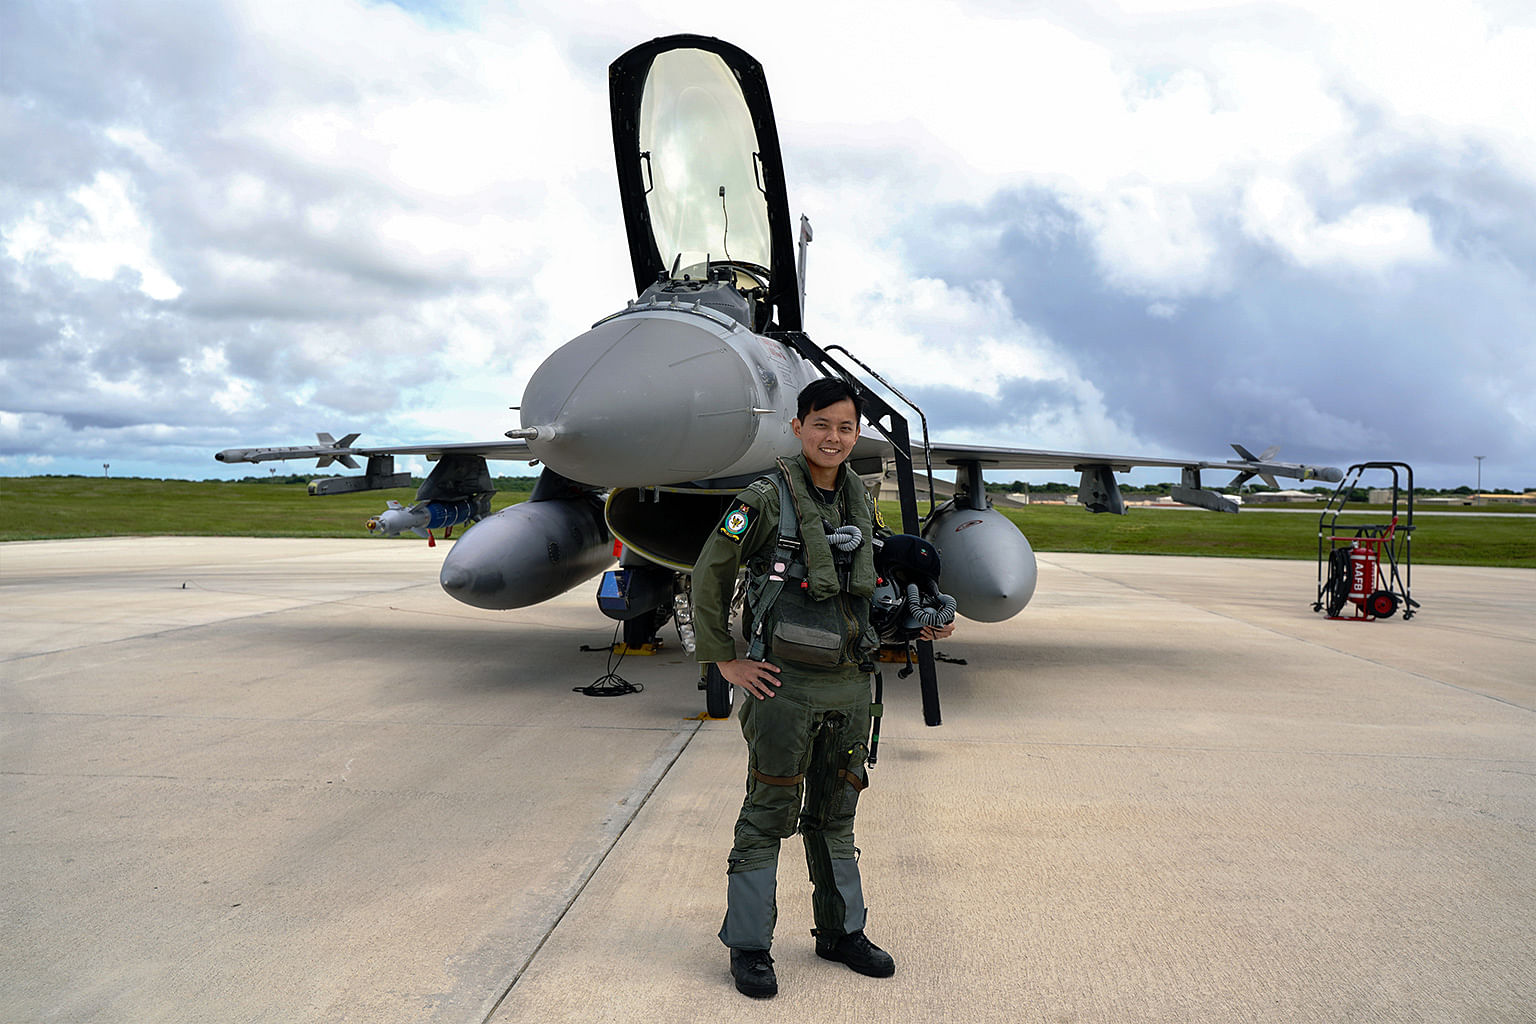 Lieutenant Colonel Jason Lau standing in front of his fighter plane